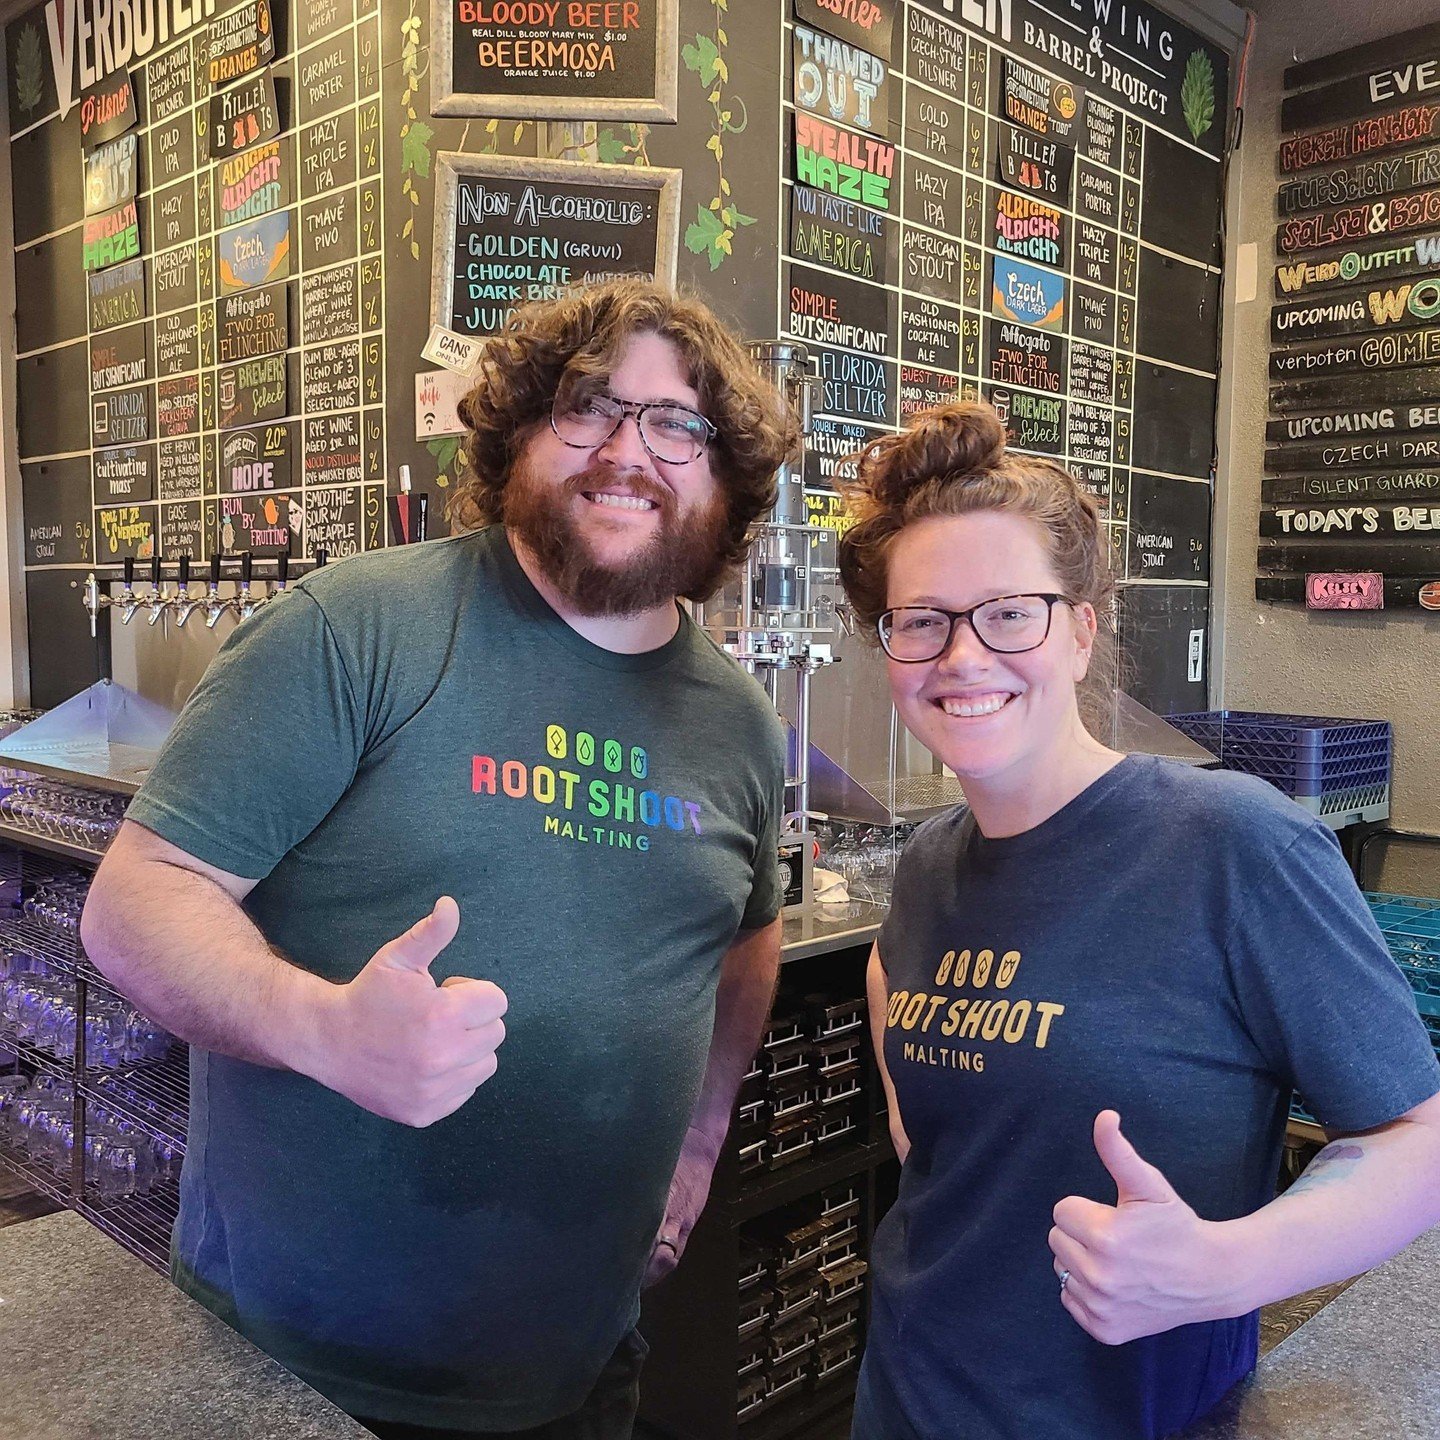 Brewing with Root Shoot (and wearing our snazzy T's) makes EVERY day a Root Shoot day! 💚
Thanks for repping our malthouse V team! 

Have ya'll checked out the @verbotenbrewing Fort Collins location? Go see about their Kolsch service! 🍻

Happy weeke